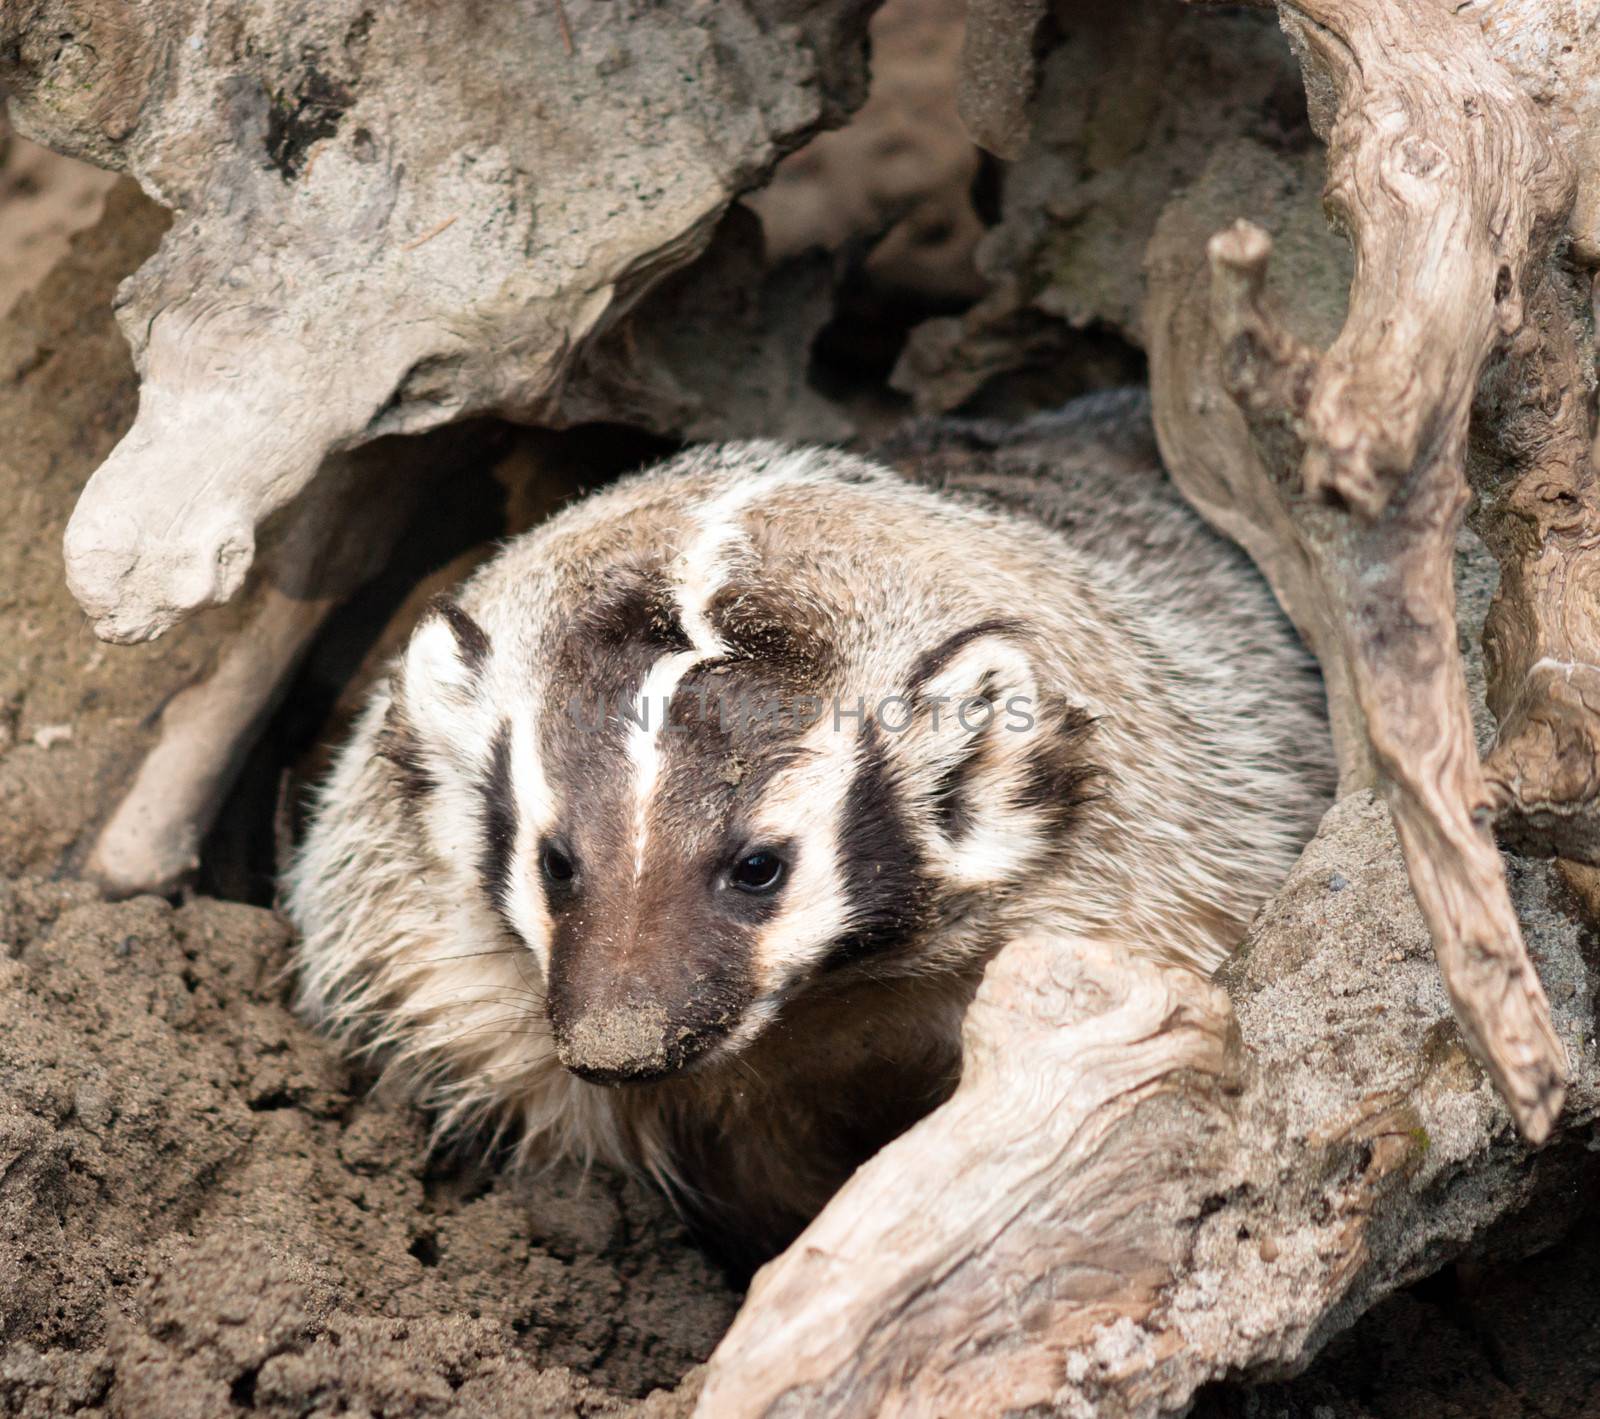 North American Short Legged Badger Emerging from Safety of Burro by ChrisBoswell